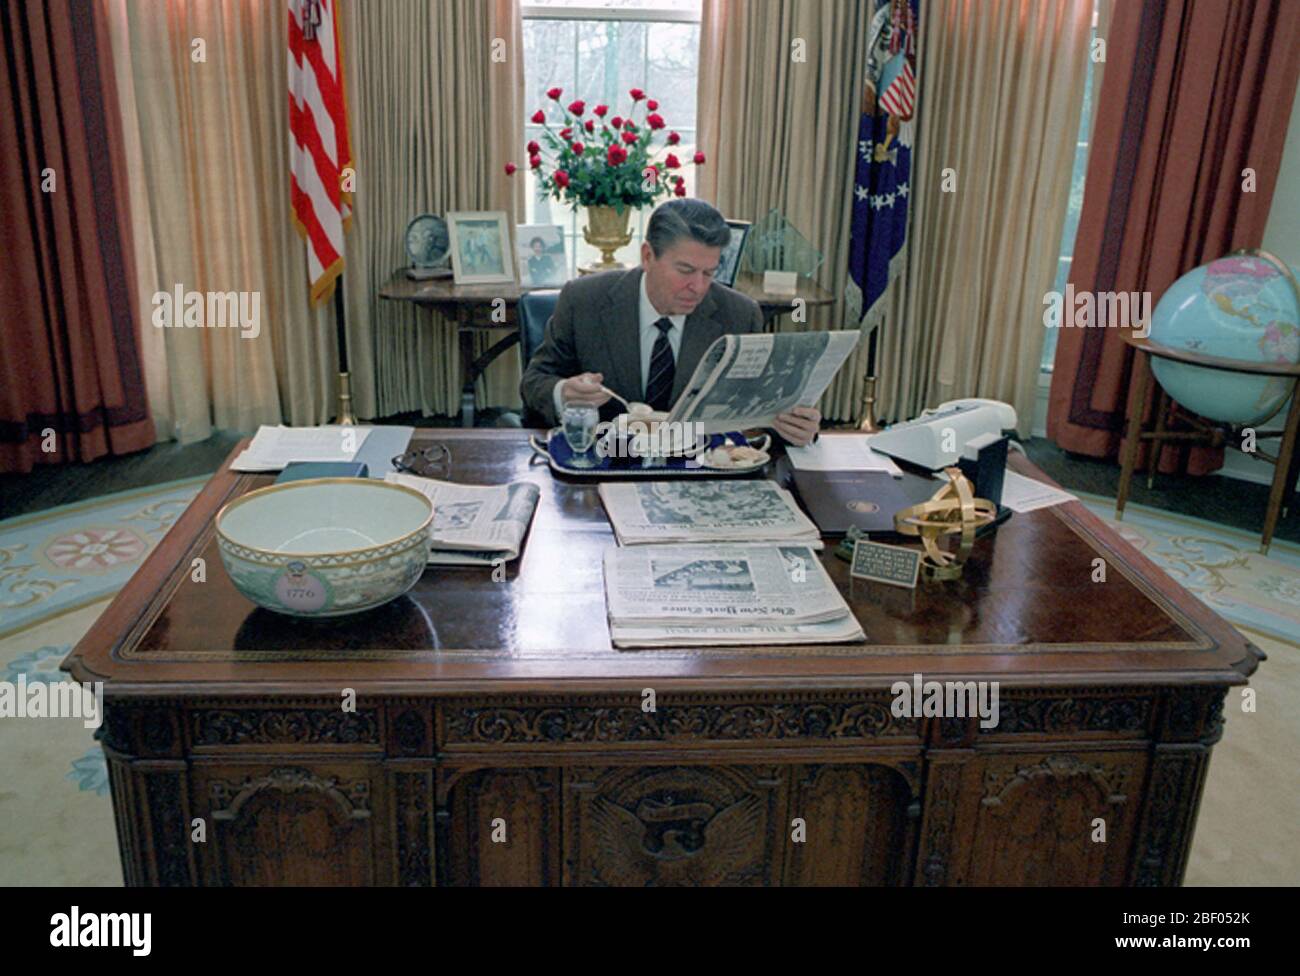 1/26/1981 President Reagan eating lunch at his desk in the oval office Stock Photo